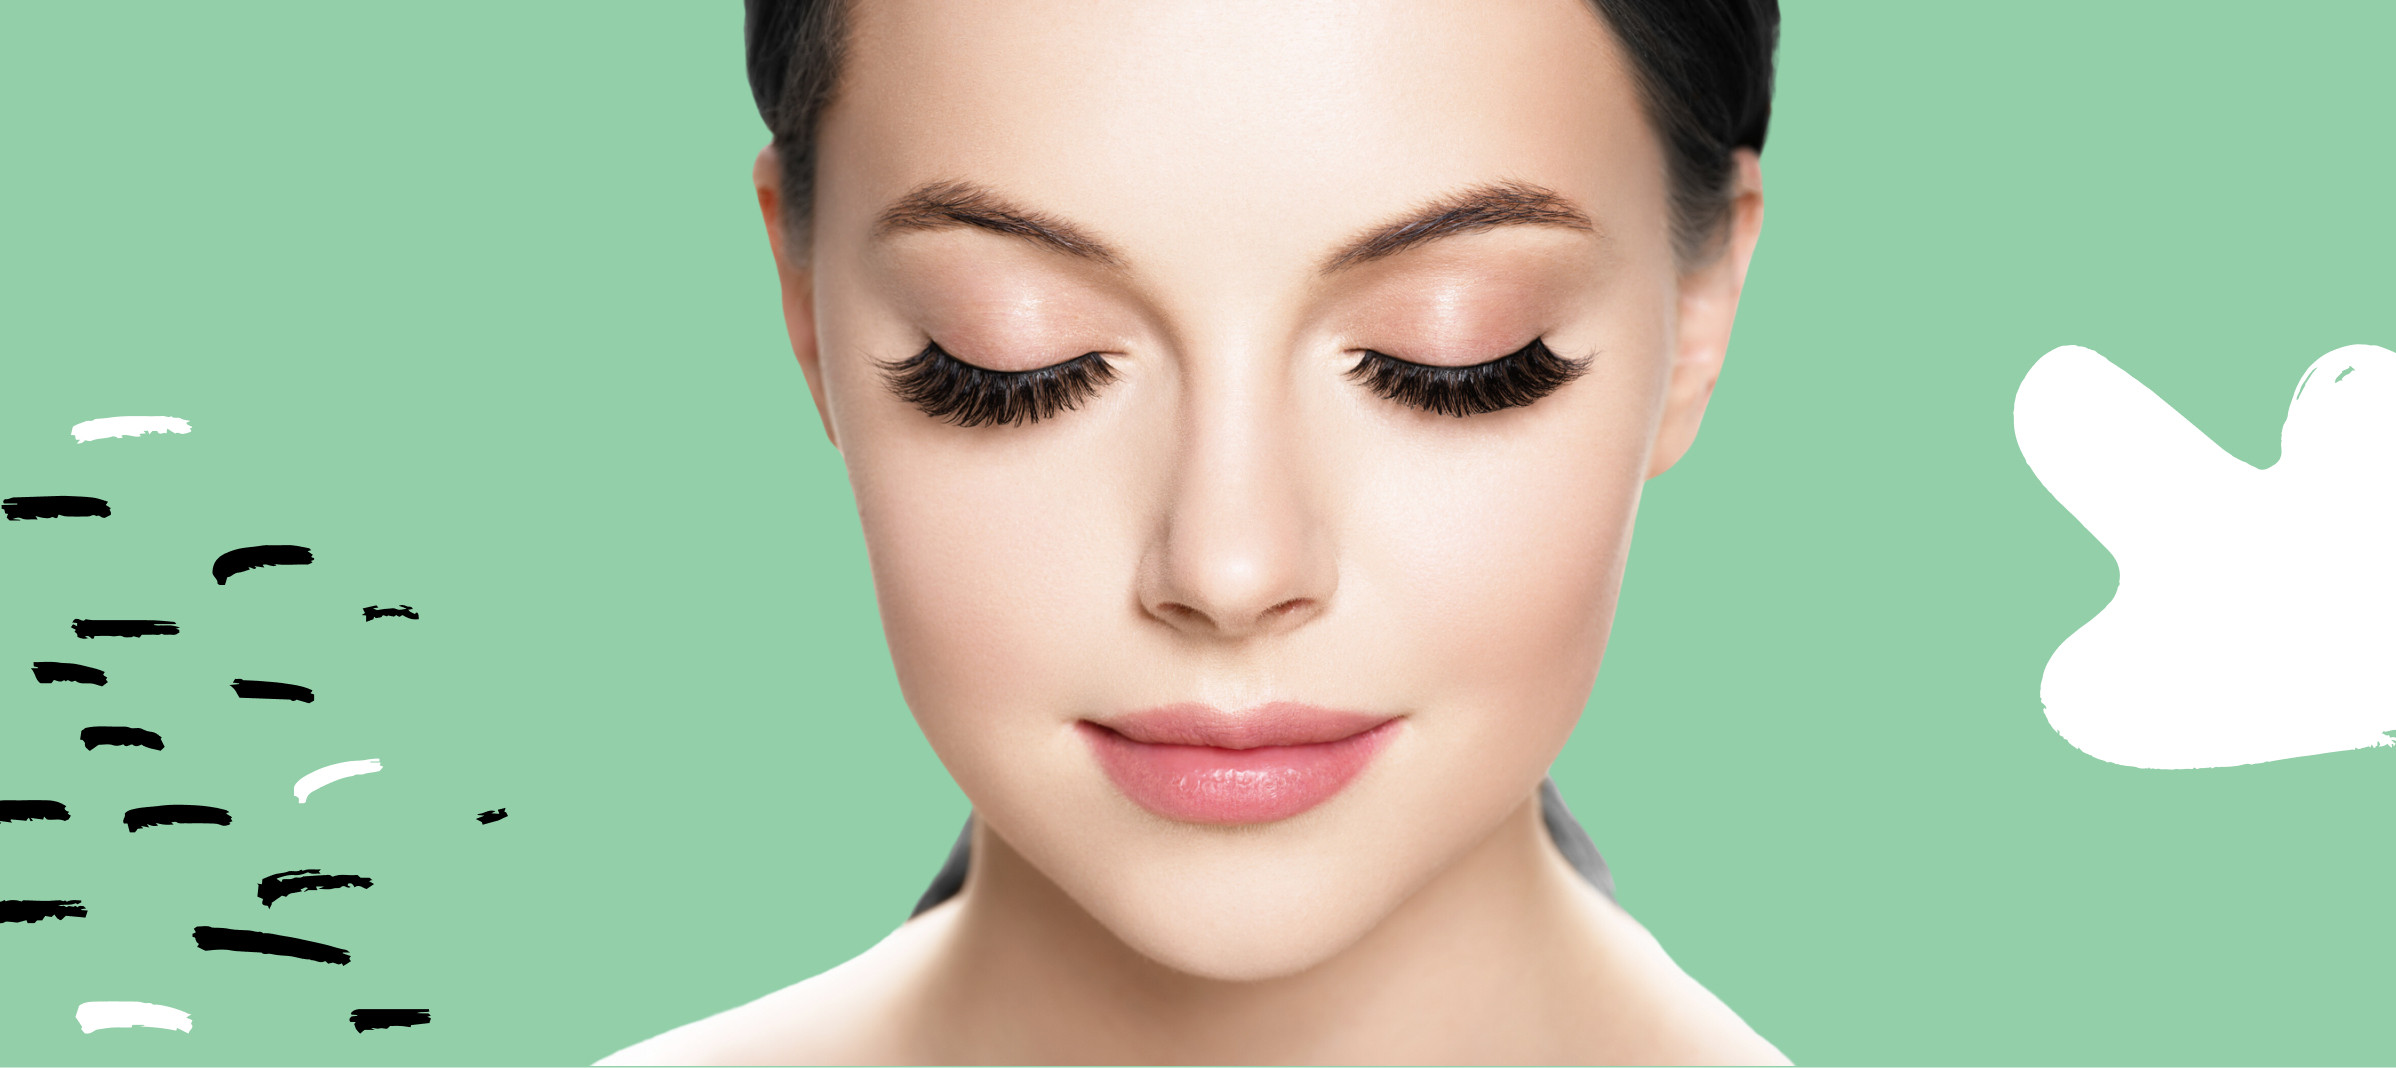 blepharitis from eyelash extensions woman with long eyelashes